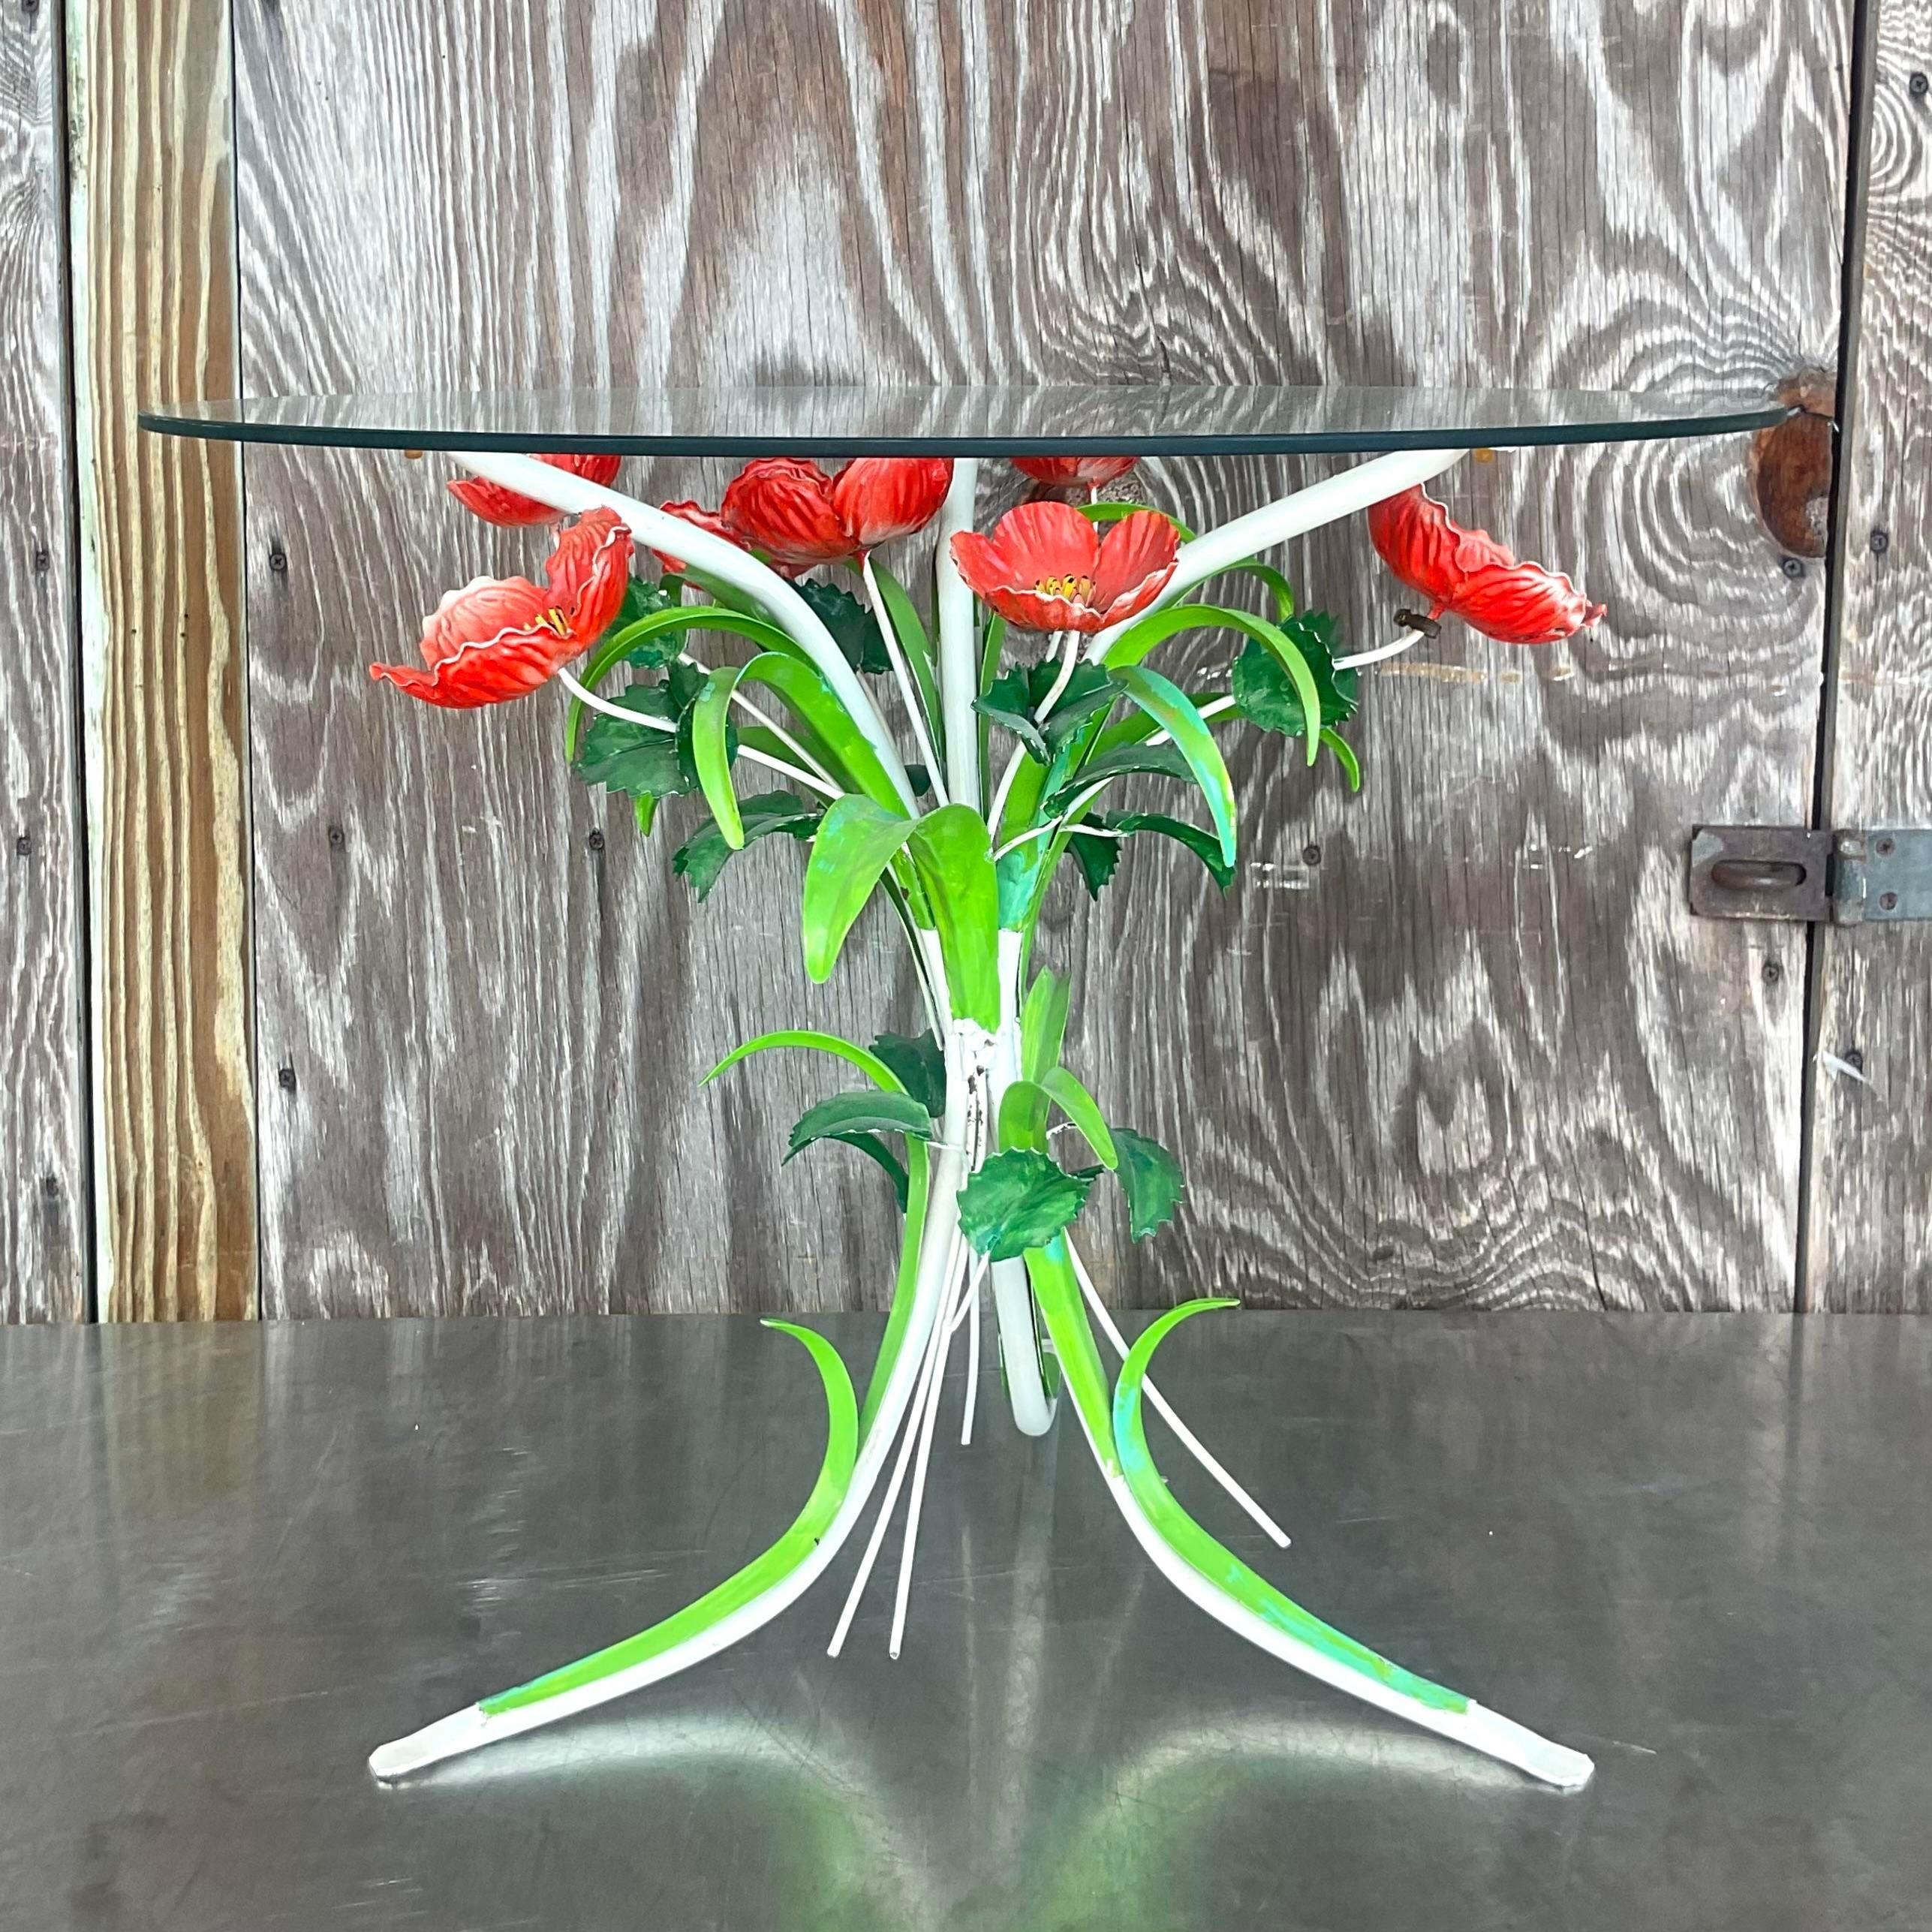 Mid 20th Century Vintage Boho Italian Hand Painted Metal Poppy Side Table For Sale 1